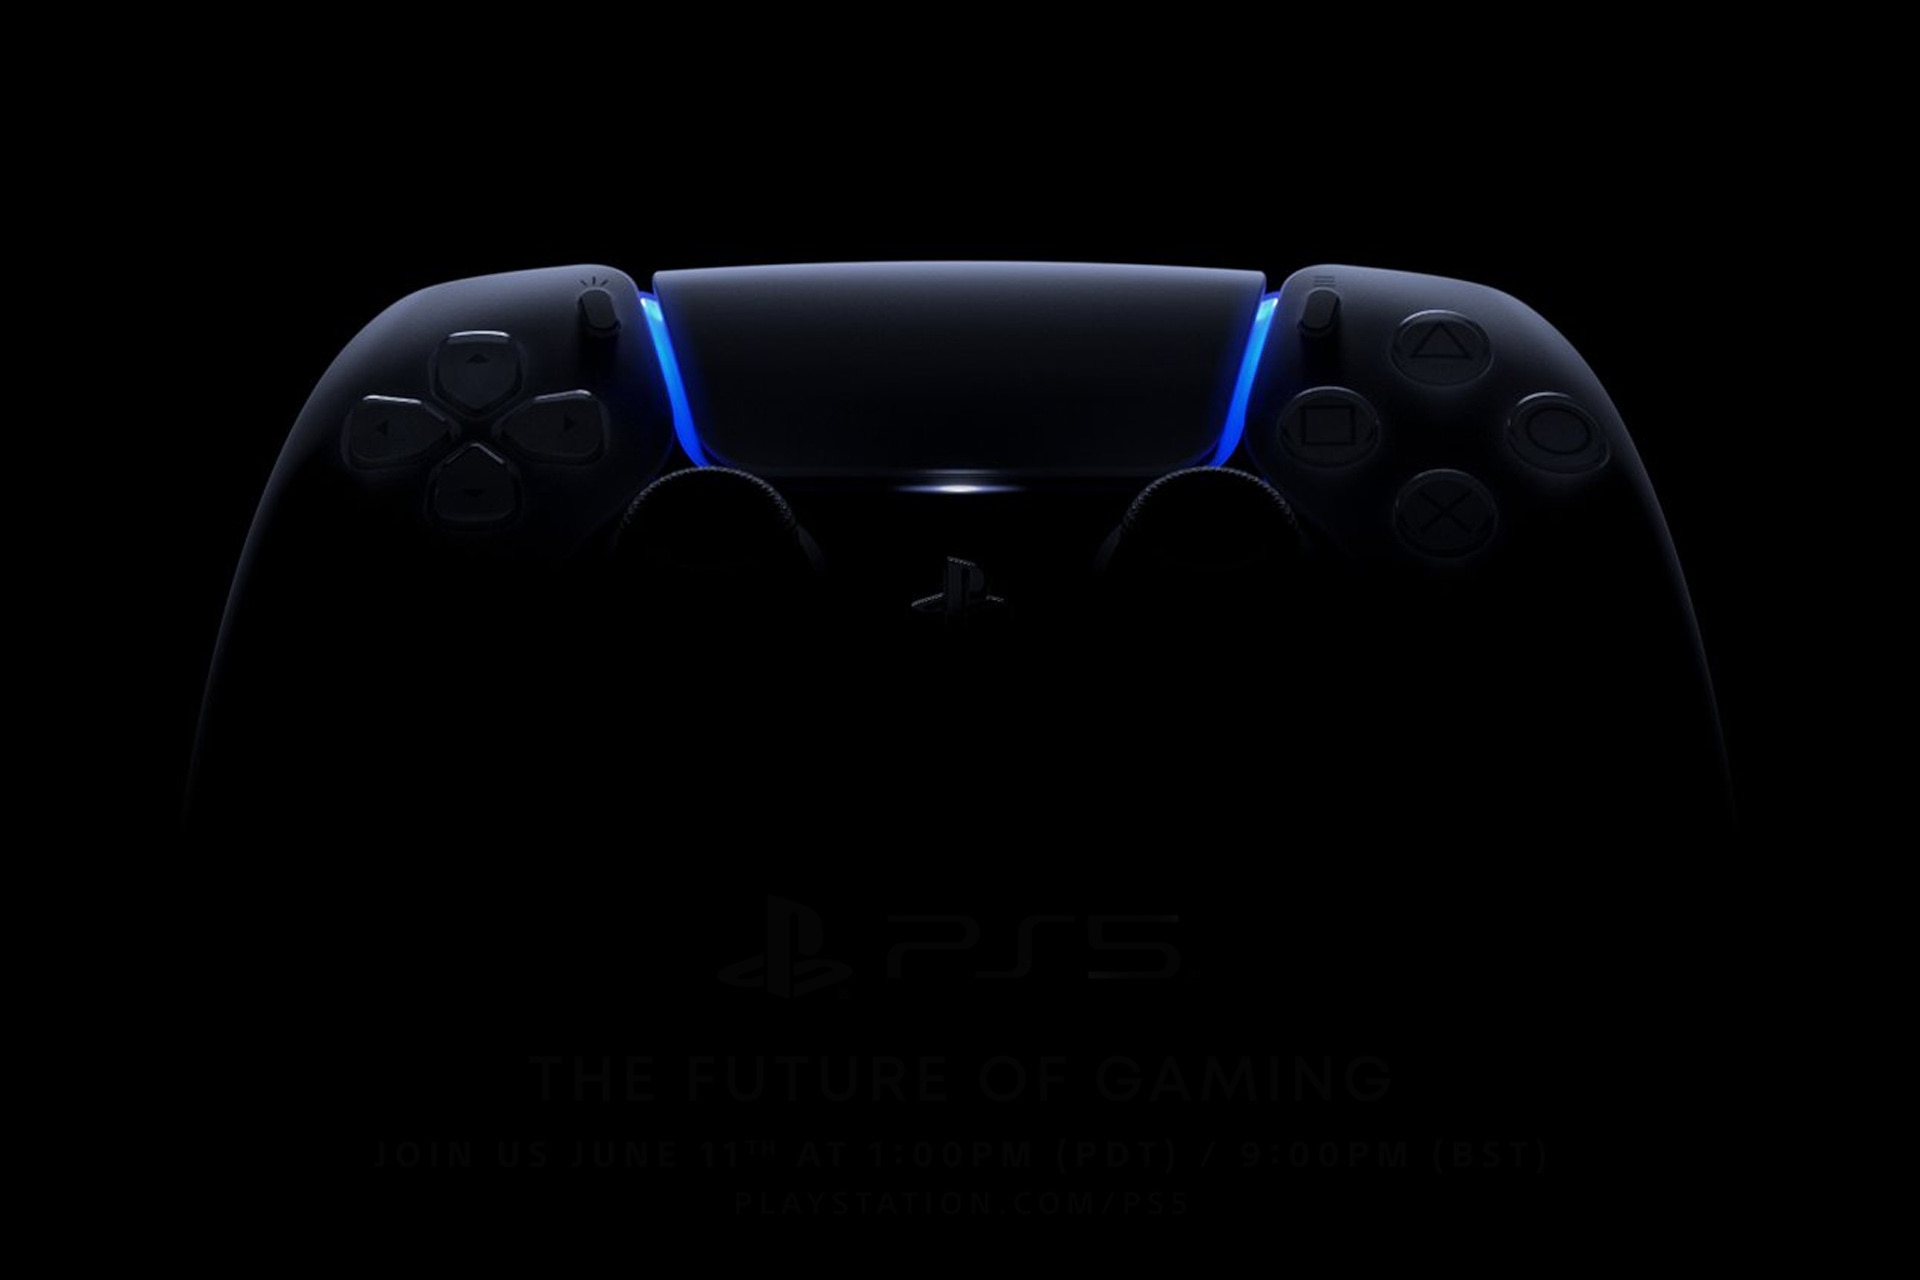 Sony announces PS4 price drop in Japan - The Verge